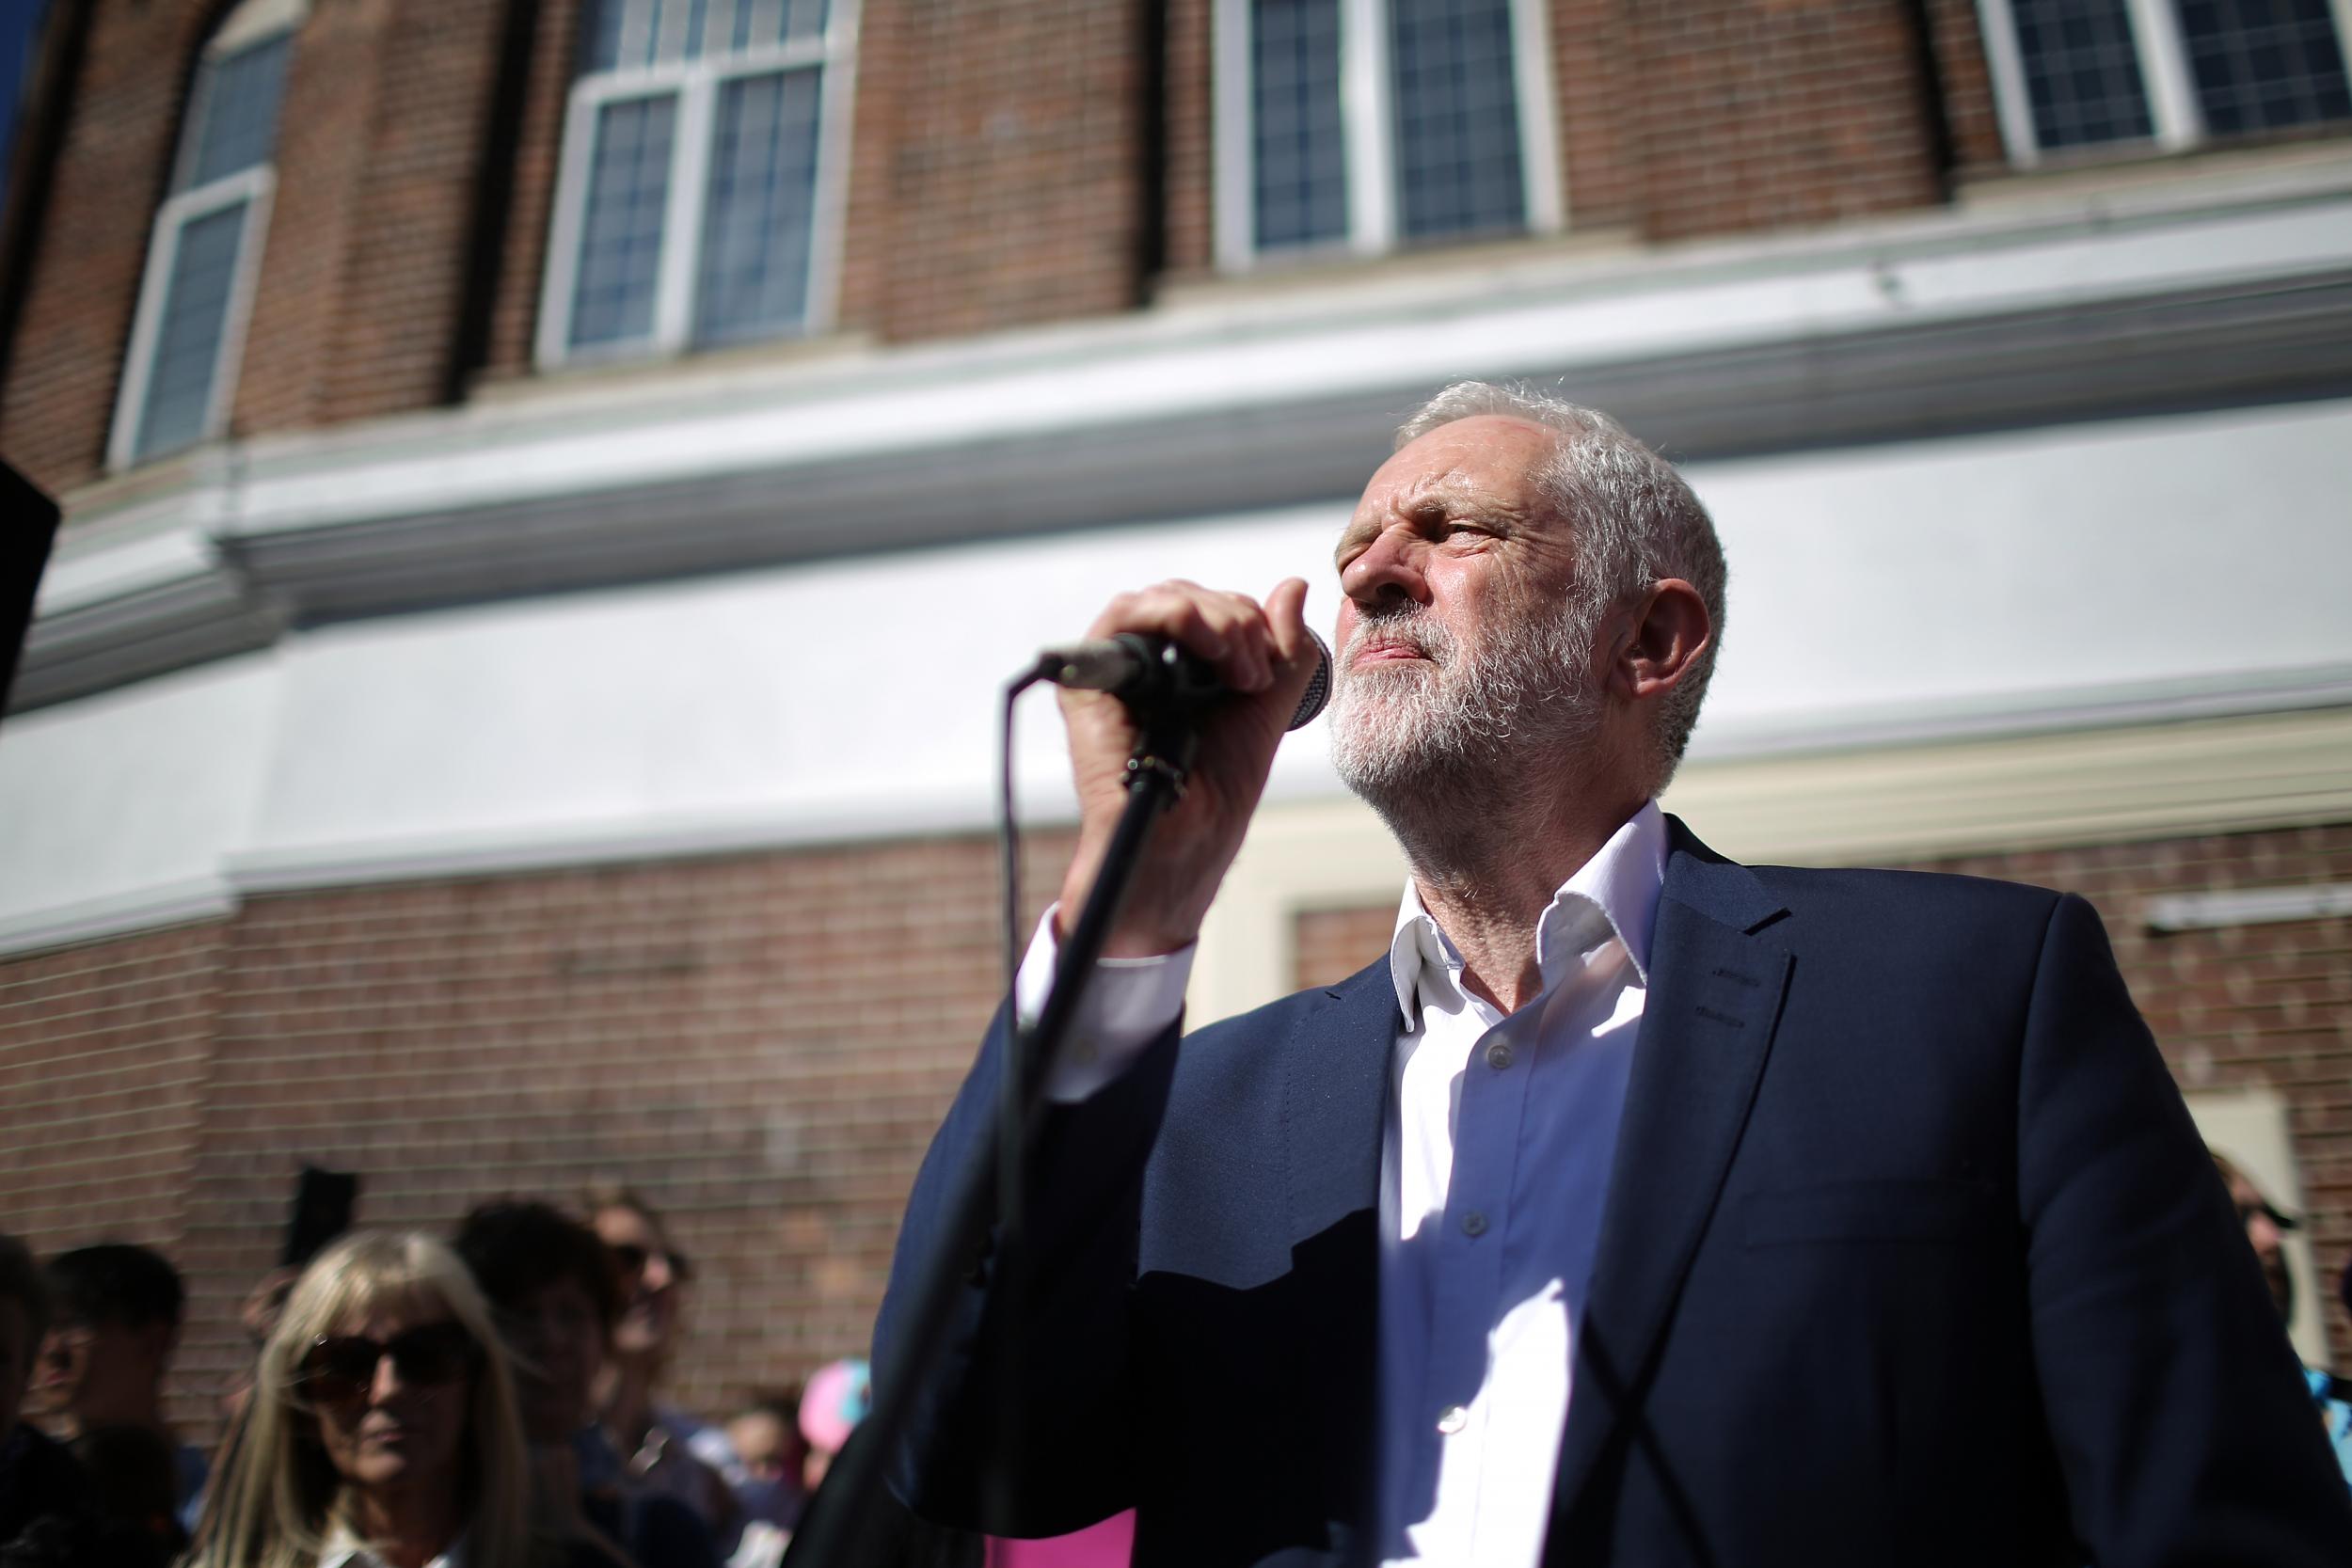 Jeremy Corbyn pledged four new bank holidays if he is elected